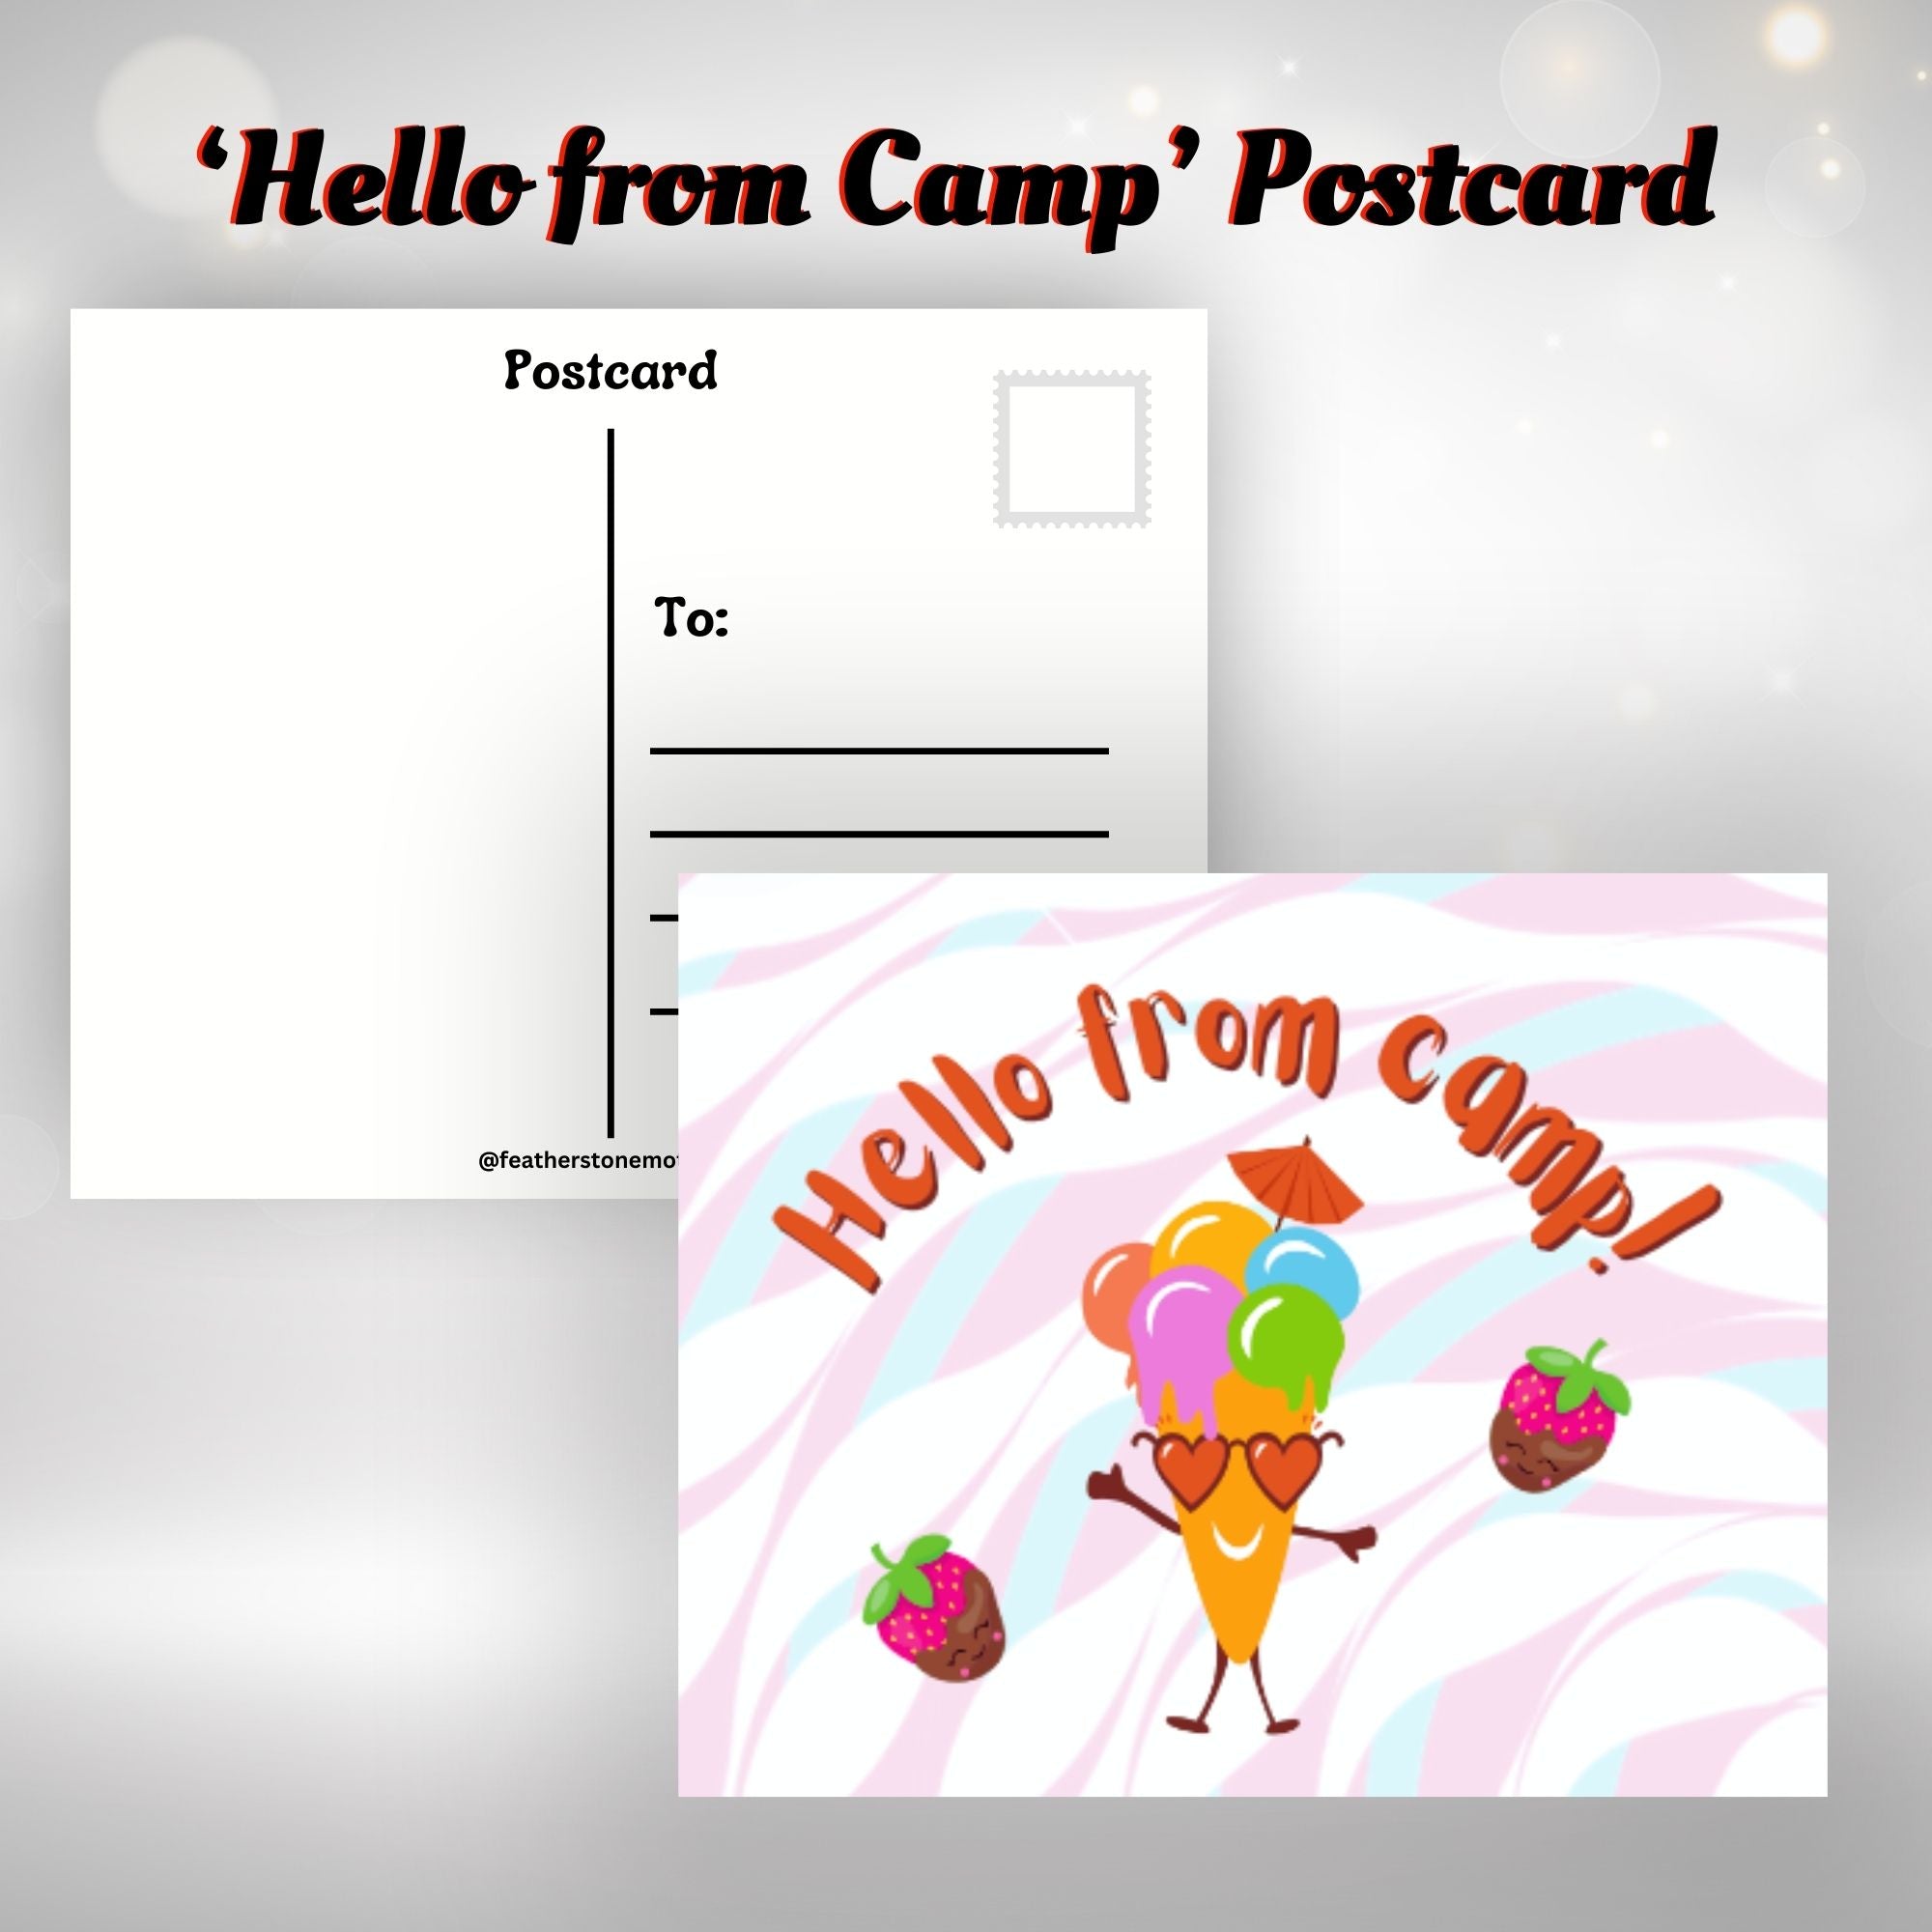 This image shows the Hello from Camp! postcard with a smiling ice cream cone wearing heart shaped glasses and chocolate dipped strawberries on either side.